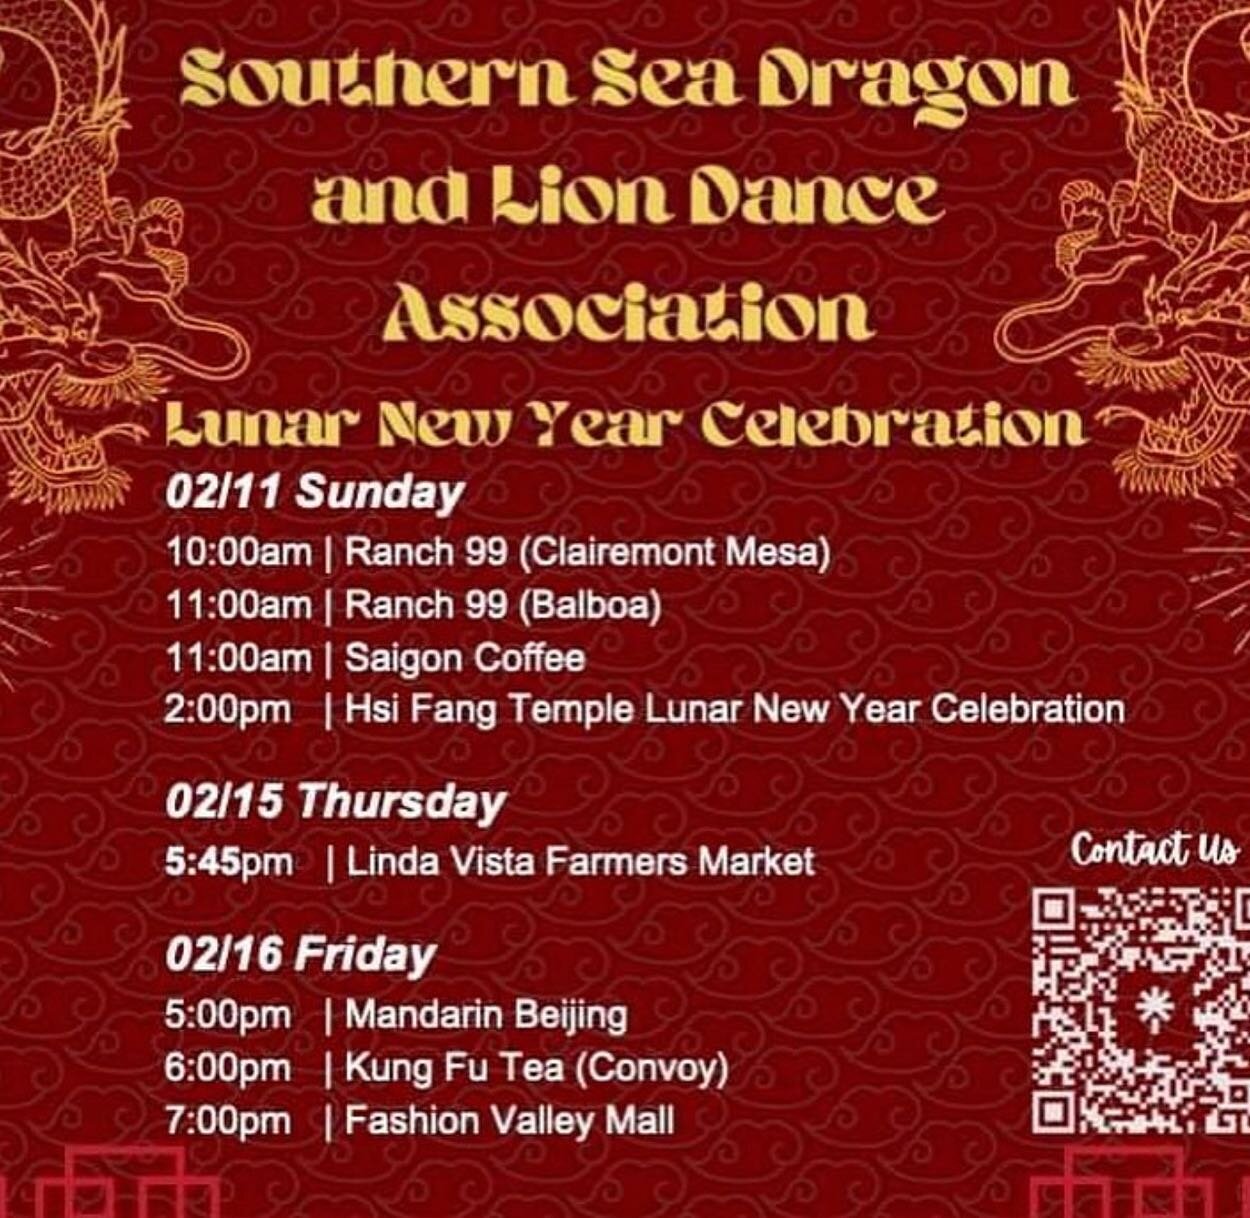 And the 2024 Year of the Dragon festivities continue! 🥳 🧧 🐉 Swipe left to check out the schedule for performances throughout this weekend (2/16-2/18)! 

🦁 Fri, 2/16 @ 6 pm: @kftsandiego 
🦁 Sat, 2/17 @ 10:30 am:  @jasmineseafood 
🦁 Sat, 2/17 @ 1